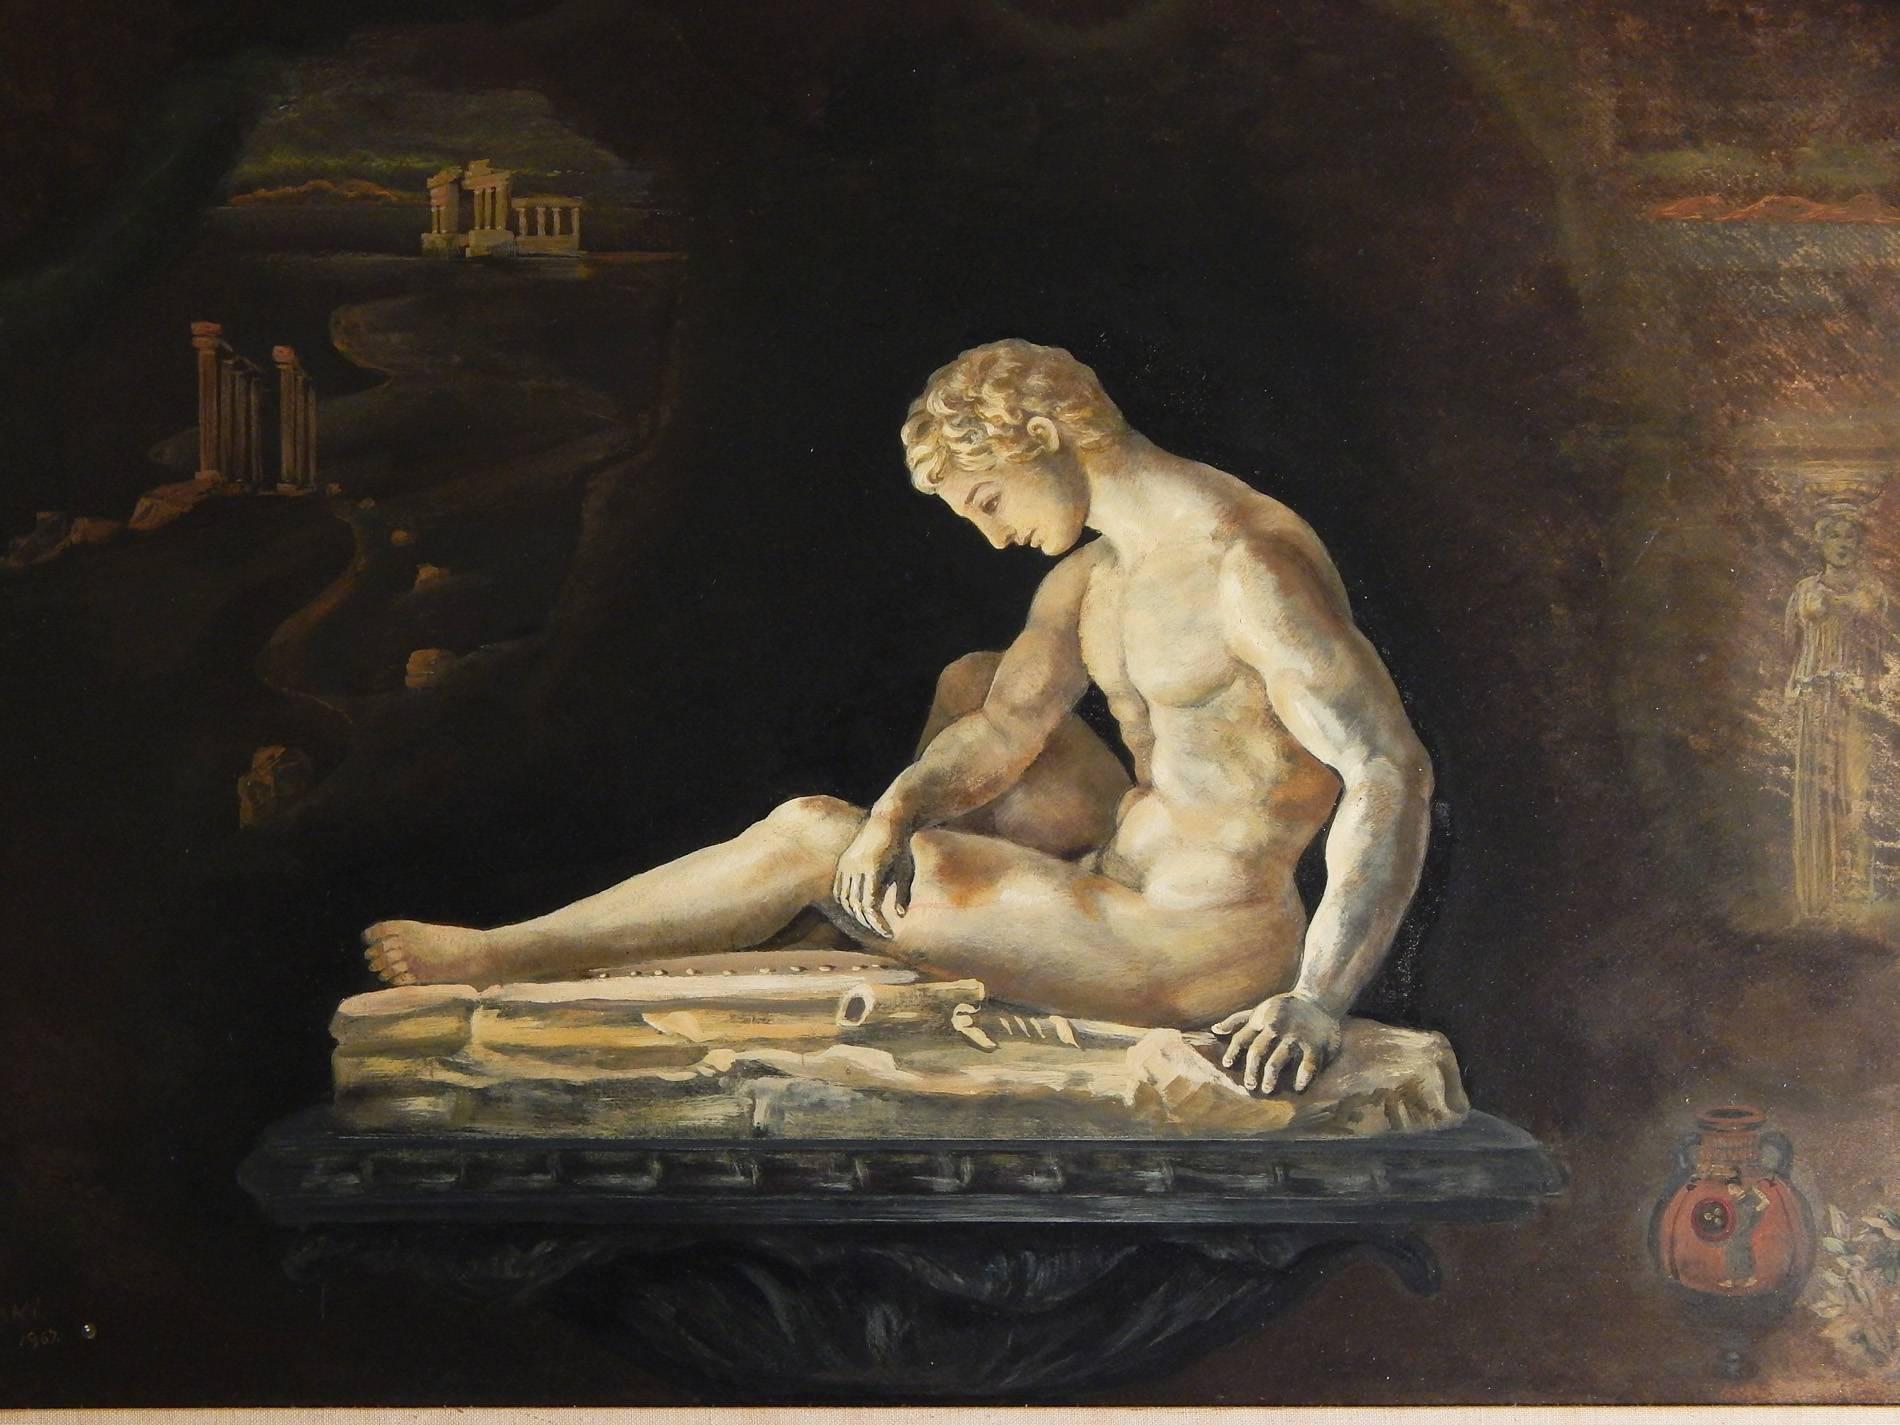 Lovely and mysterious, this dreamlike depiction of a Classic Greek nude figure, upheld on a column capital and contemplating a flutelike instrument -- akin to the bones of civilization -- with the ruins of Greek temples in the distance, is one of